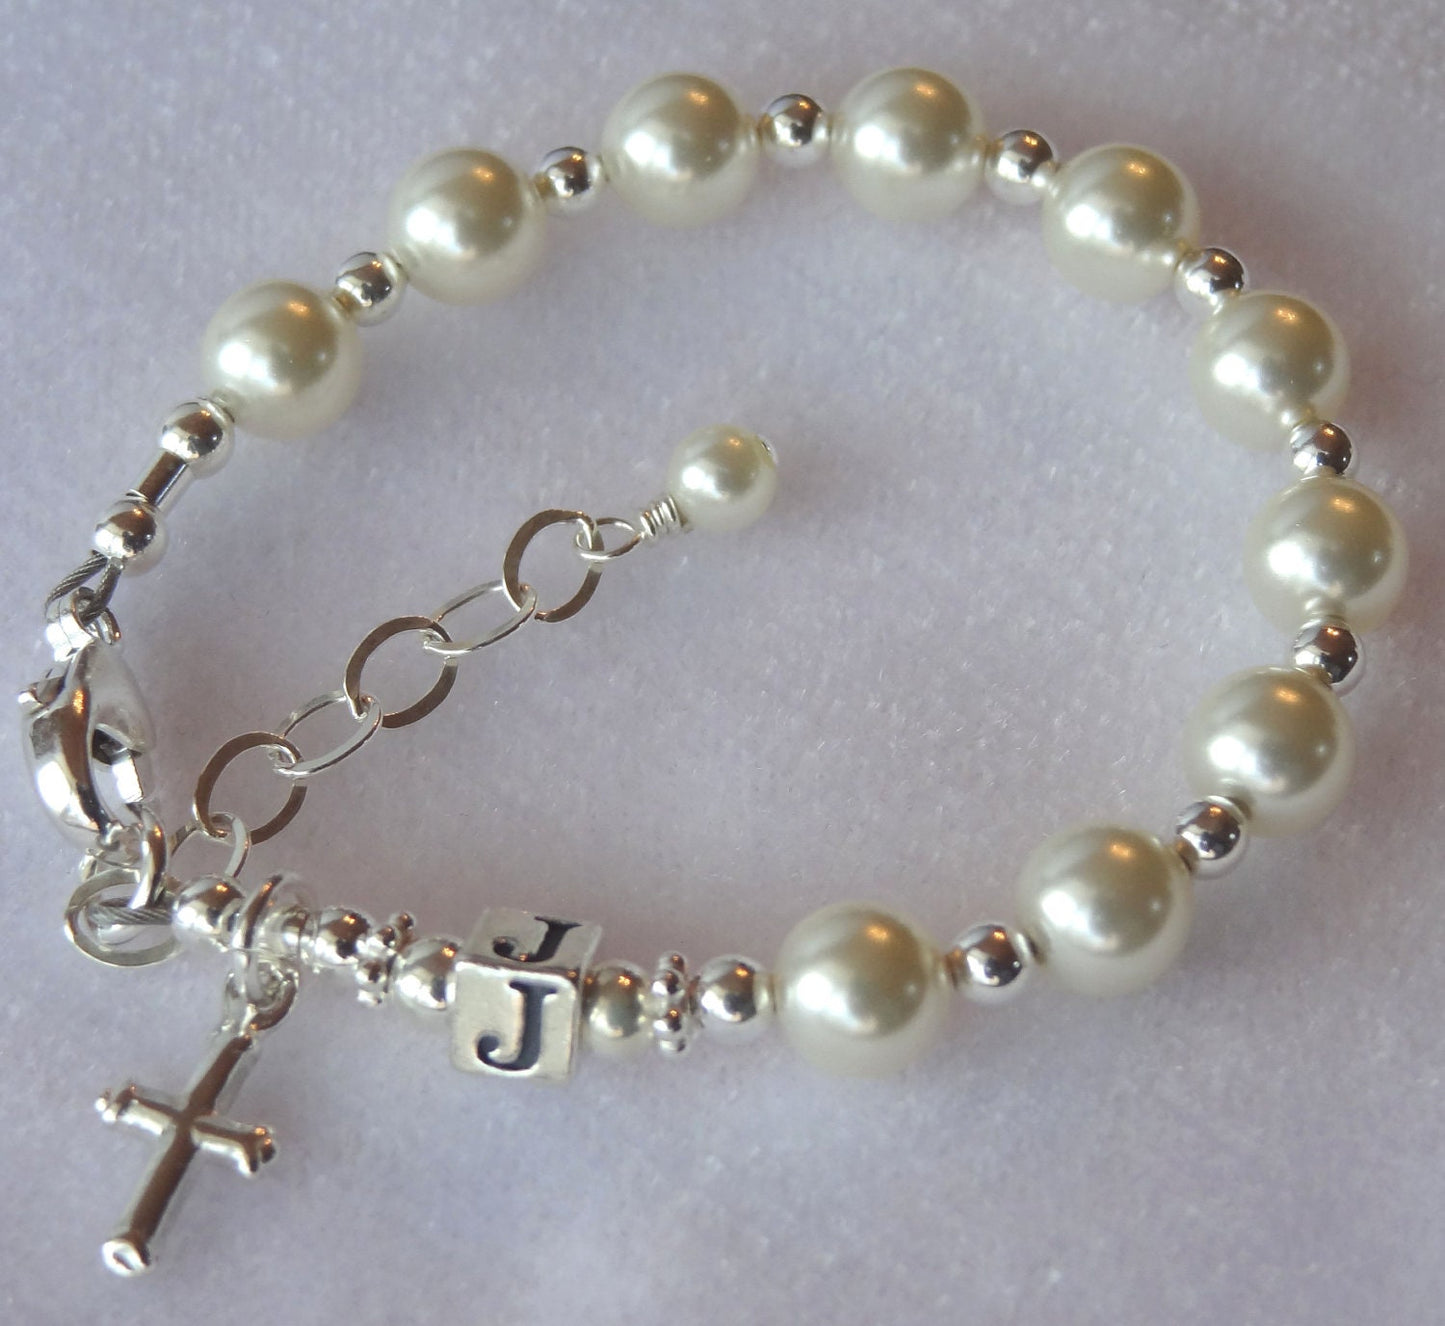 Baptism Personalized Baby Initial Rosary Bracelet,Baby Baptism Bracelet,First Communion Bracelet,Confirmation Bracelet,Christening Bracelet